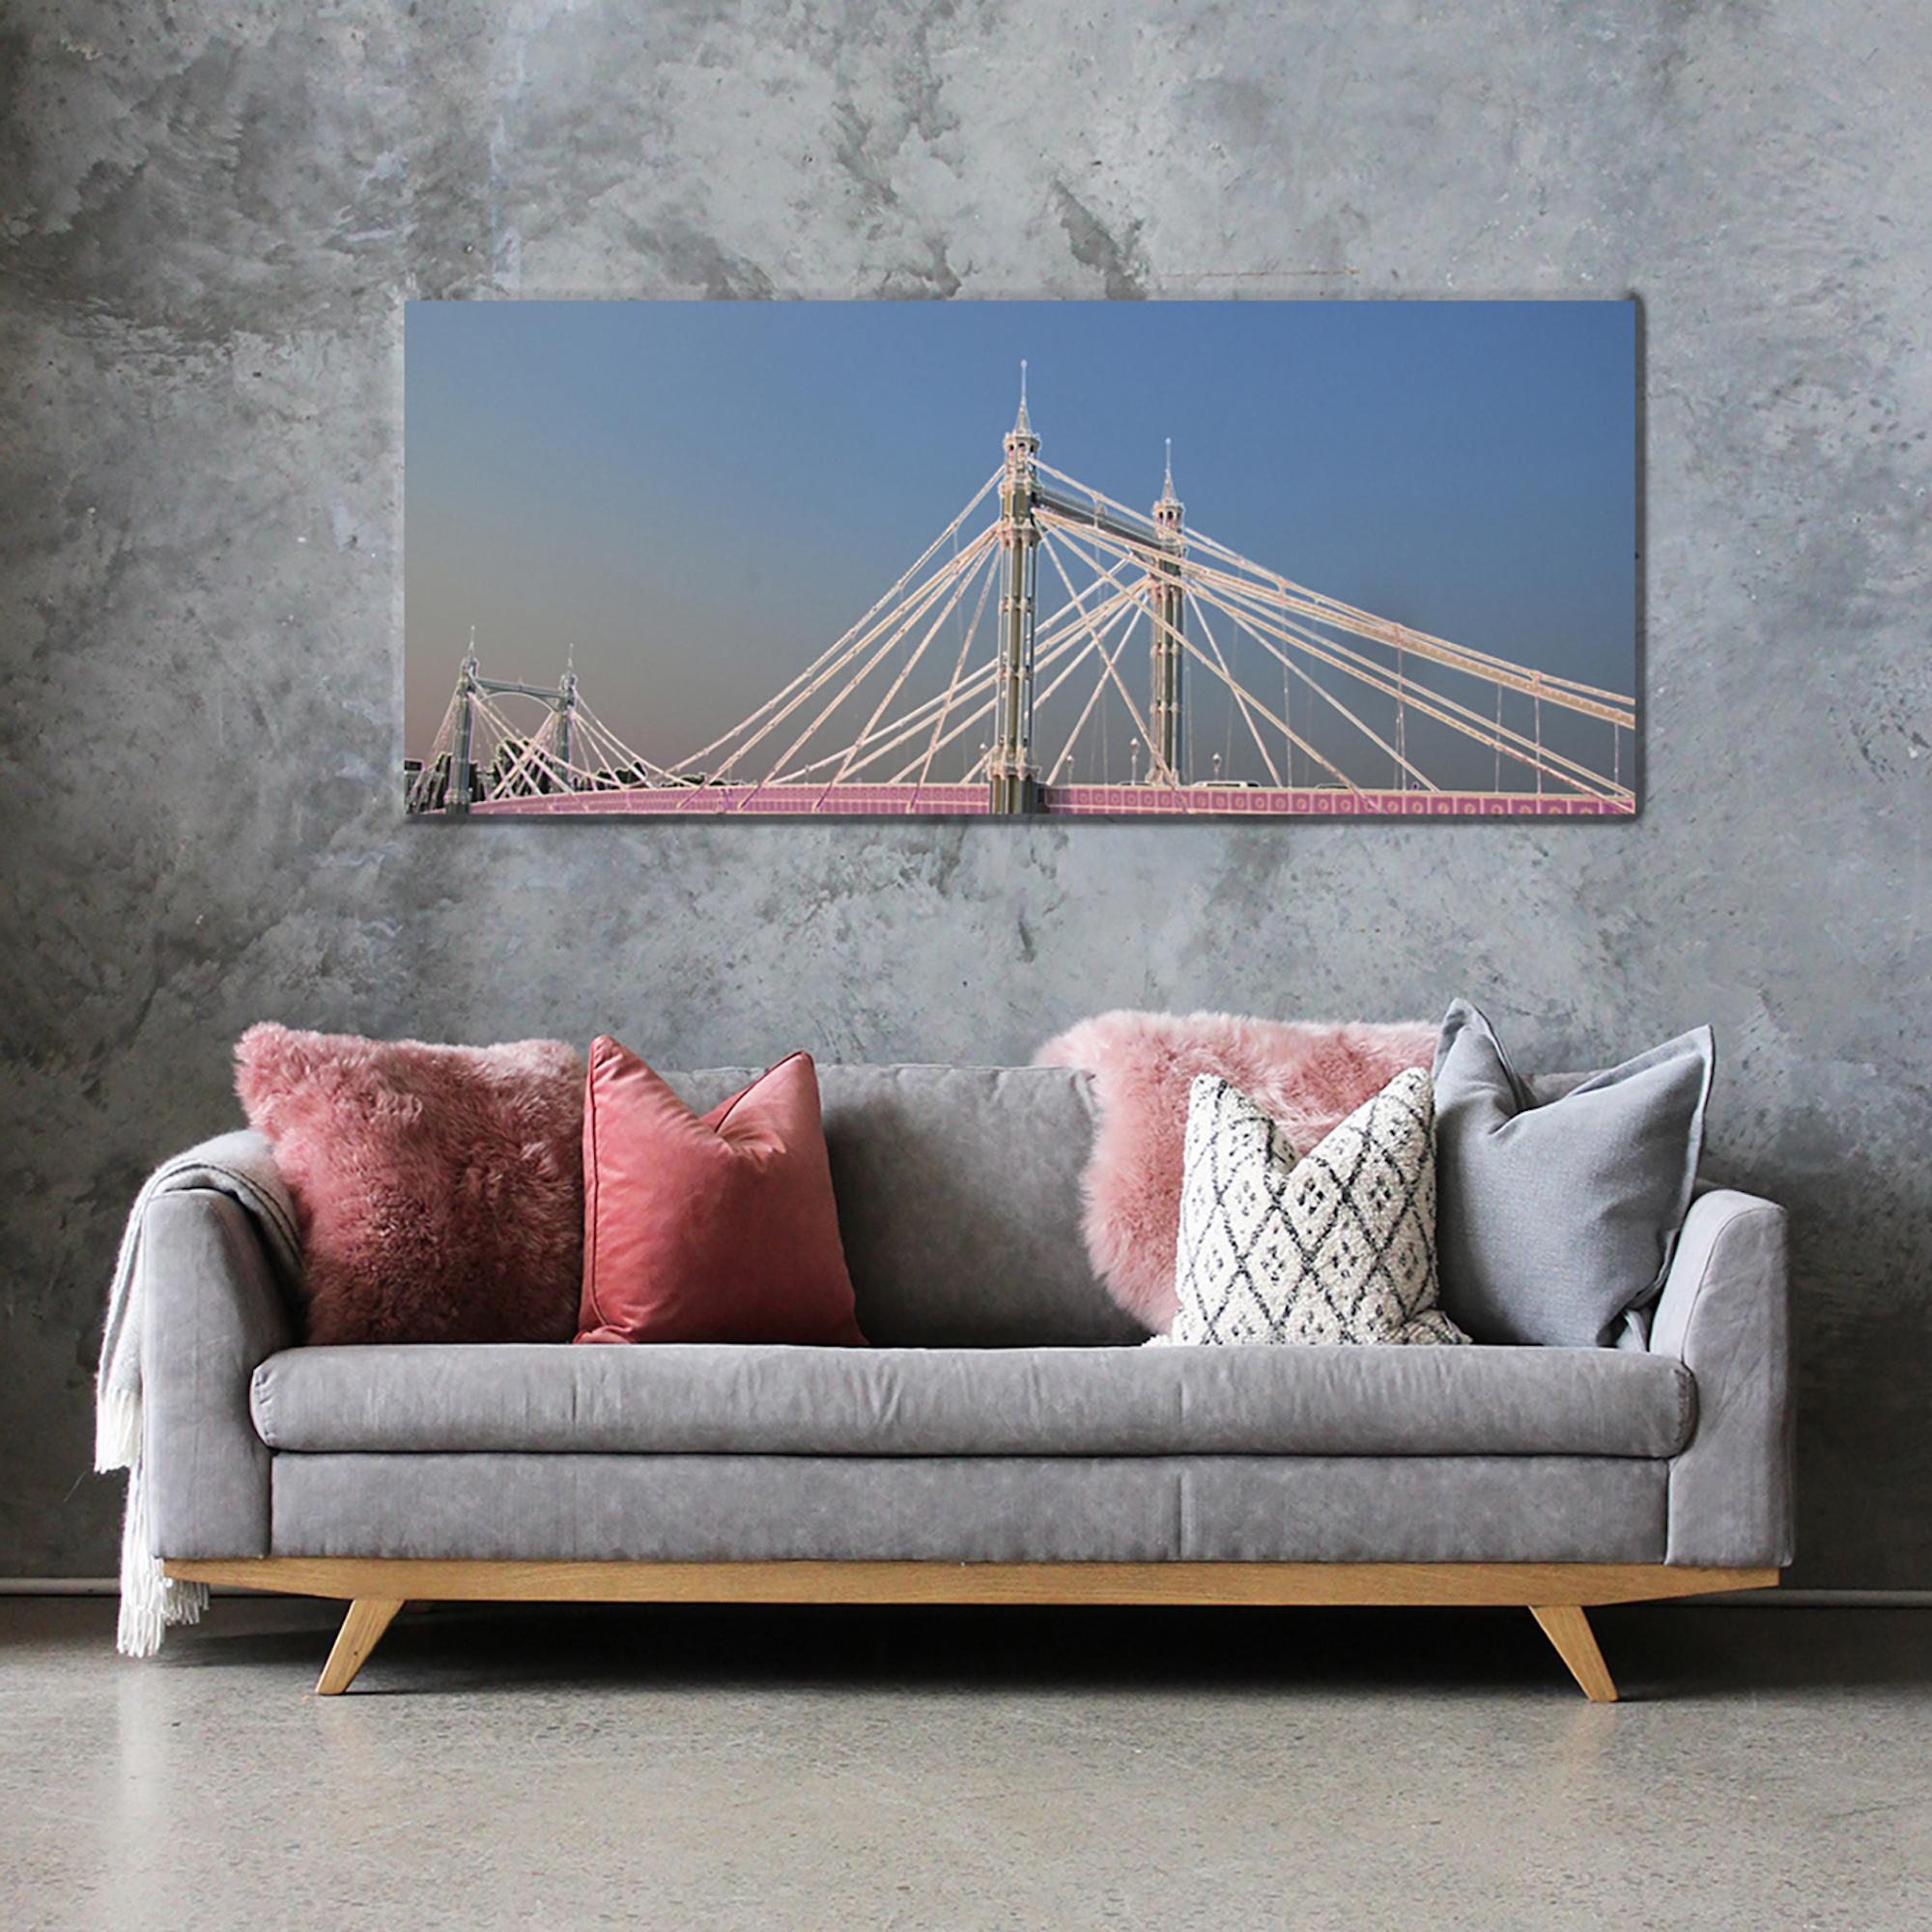 Albert Bridge, Aluminium By Michael Wallner [2019]

limited_edition
Brushed aluminium
Edition number 25
Image size: H:50 cm x W:135 cm
Complete Size of Unframed Work: H:50 cm x W:135 cm x D:0.3cm
Sold Unframed
Please note that insitu images are